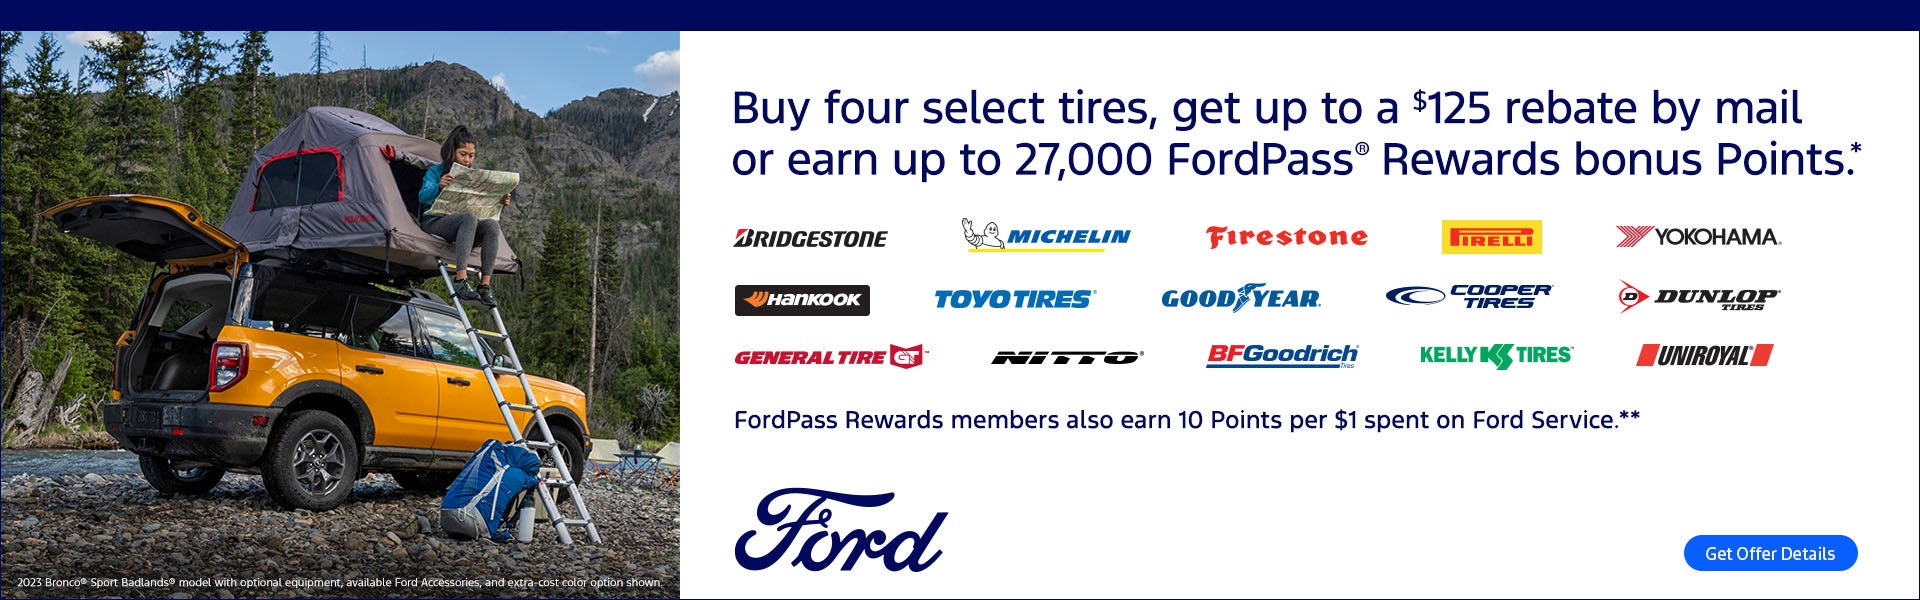 Buy four select tires, get up to a $125 rebate by mail or earn up to 27,000 FordPass® Rewards bonus Points.*